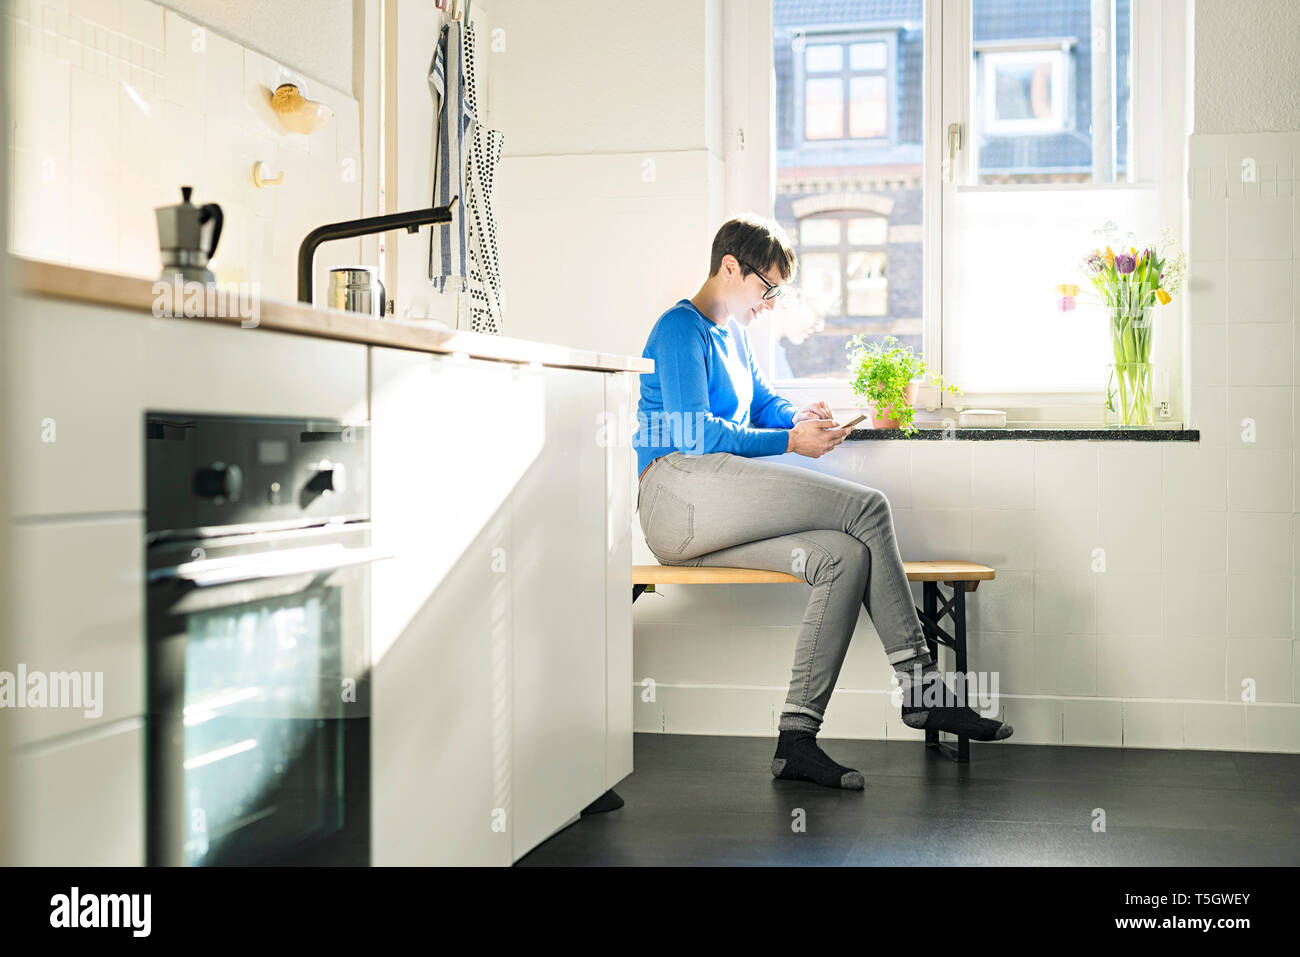 Short-haired woman sitting on bench in kitchen at the window using smartphone Stock Photo